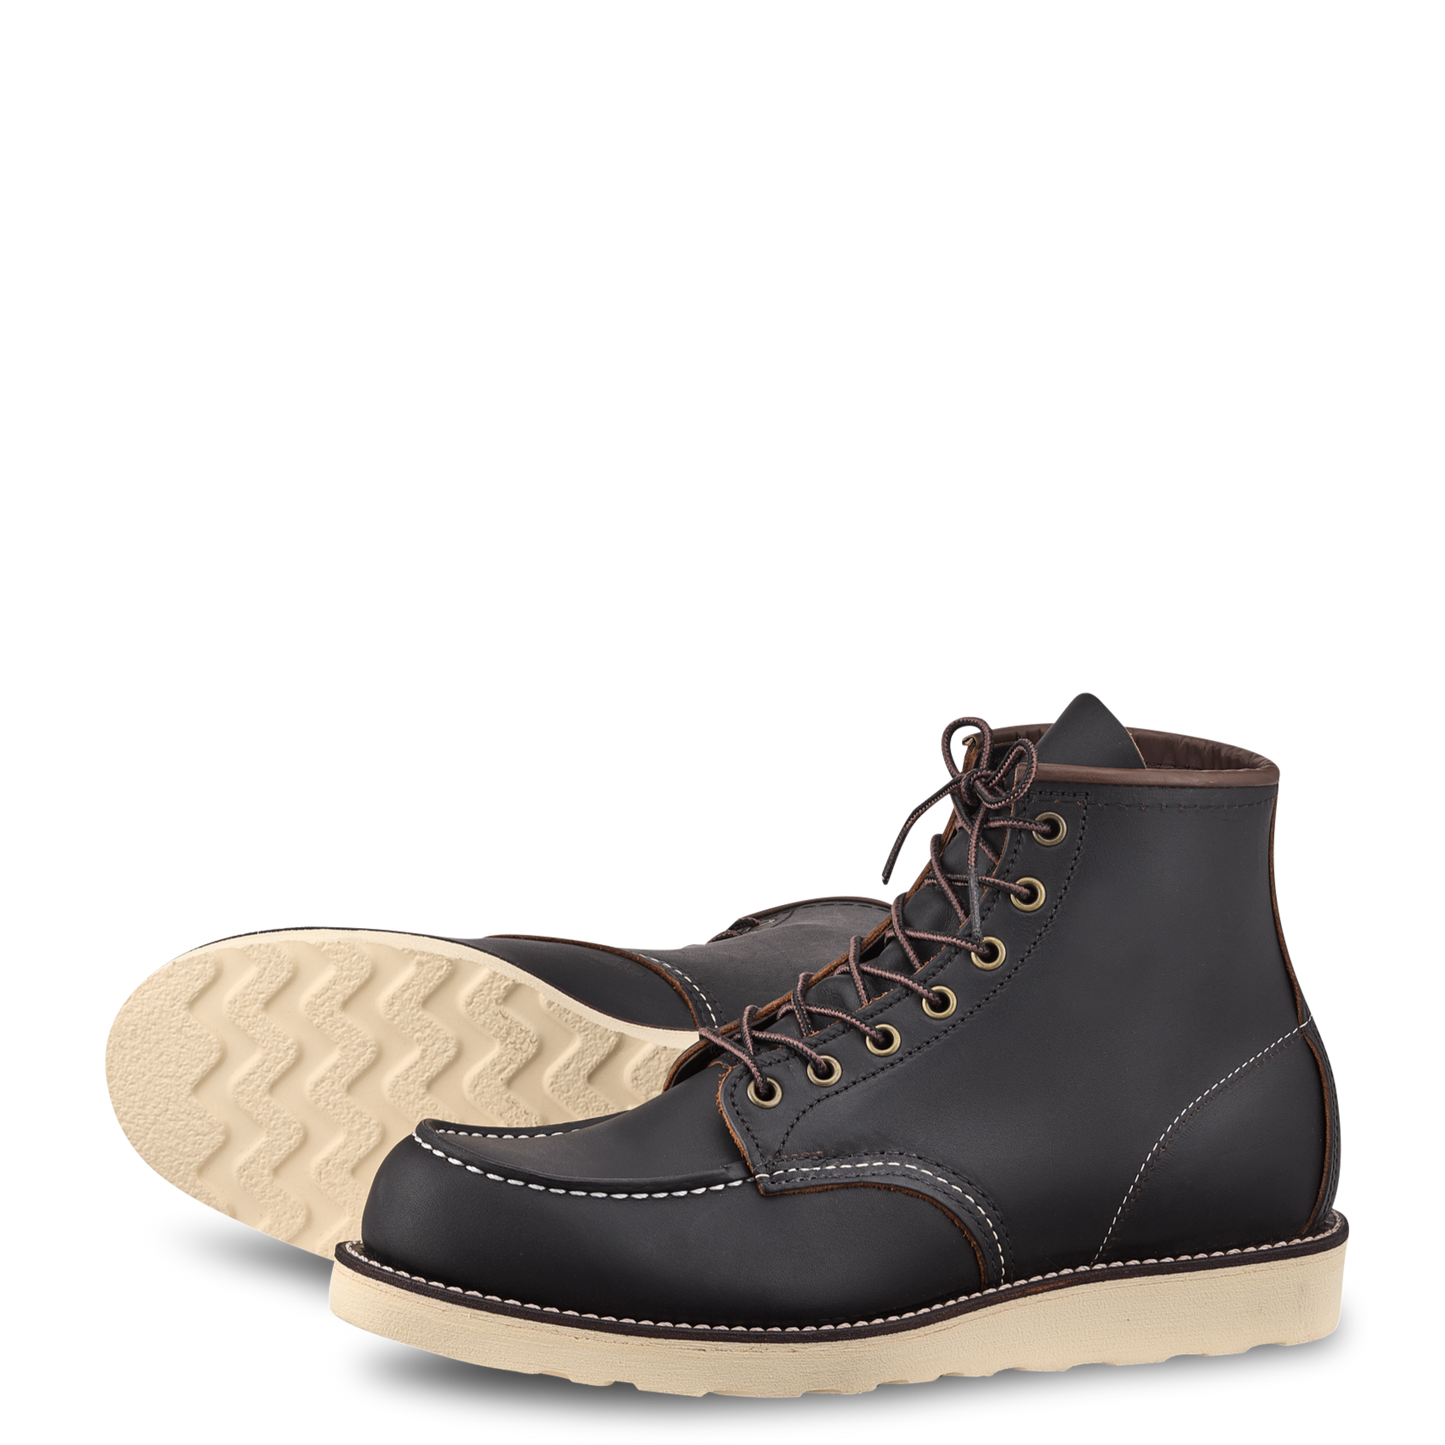 Red Wing 8849 Classic Moc Toe Boot